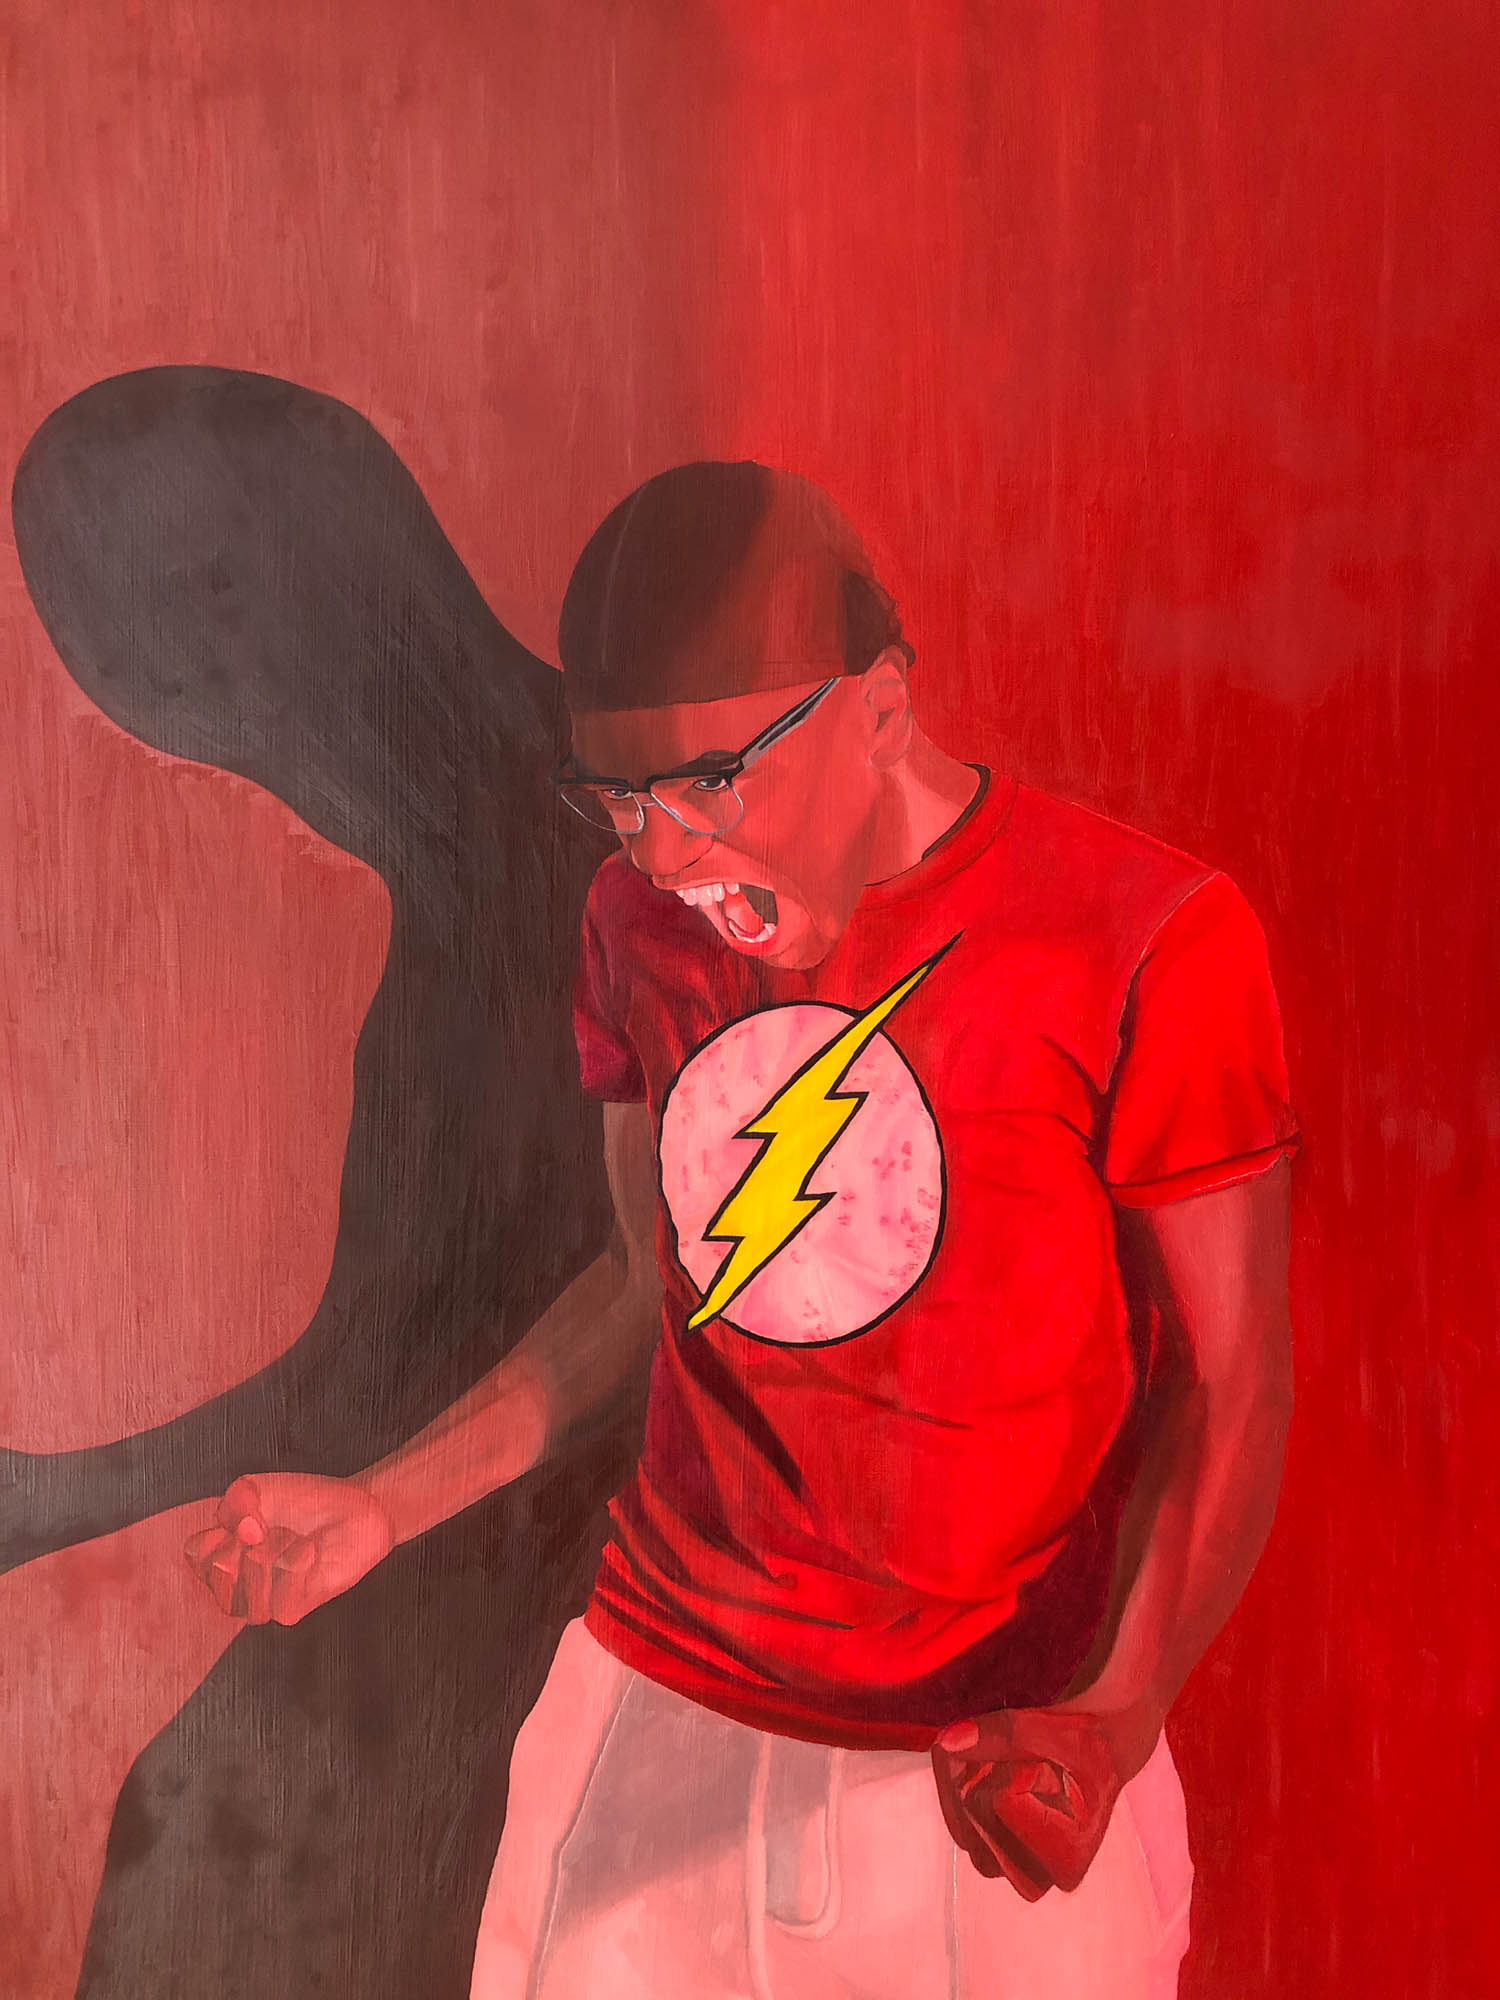 African American male friend emphasizing an emotion of anger. Wearing a warm red colored shirt, with warm white colored pants. Incorporating multiple areas of warm tone reds onto the skin of the face, neck, hands, and arms. Also, having a shade silhouette behind the male figure. Warm and cool tones of reds on the background to compliment both the figure and the emotion of anger. Detailed and textural areas within the shirt, shorts, arms, face, and background. 